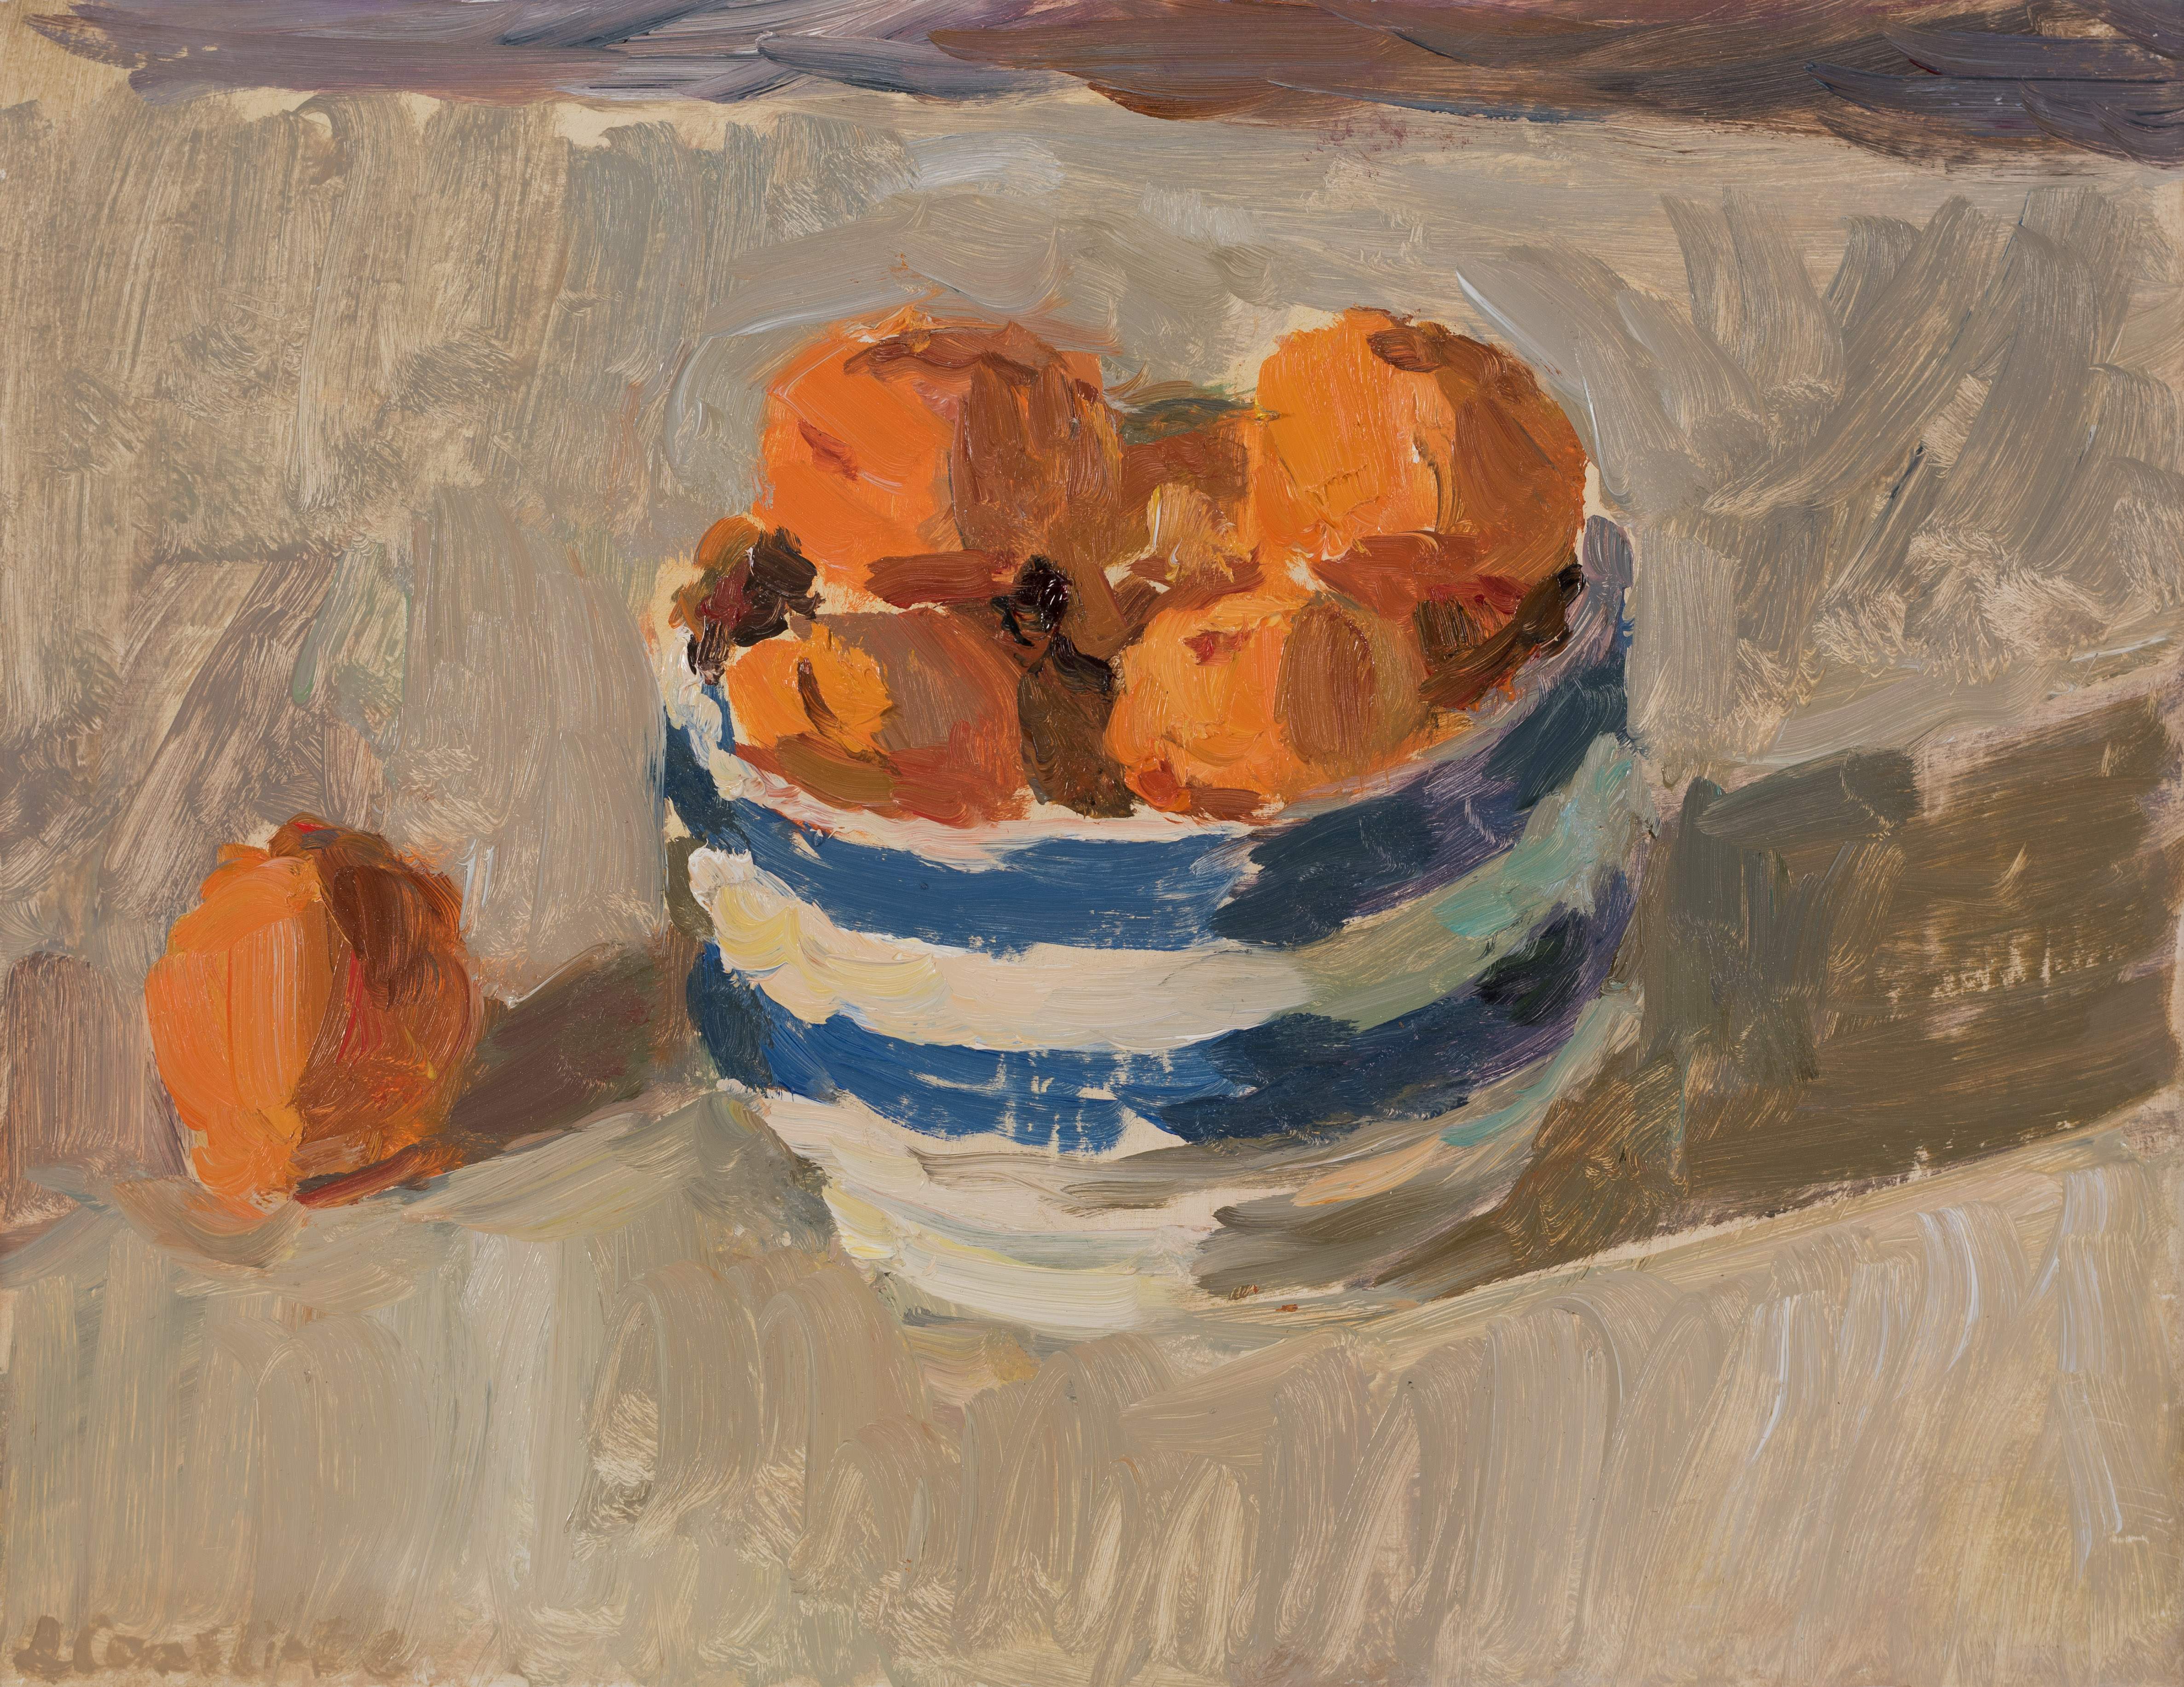 Apricots in a Striped Bowl